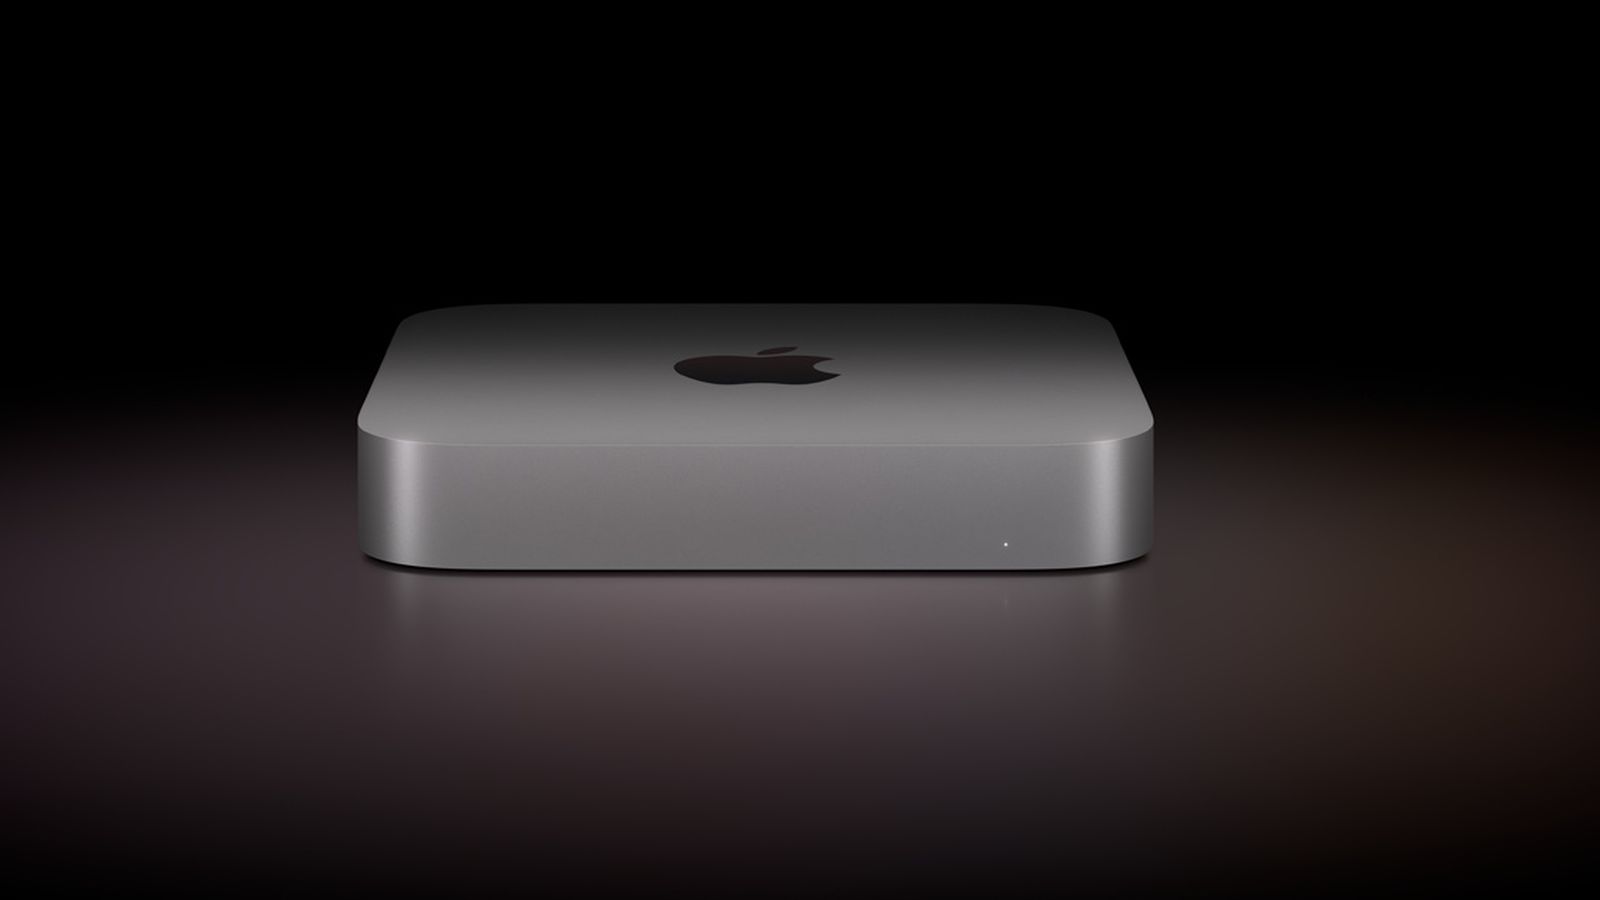 Here's how I/O has changed on the Apple Silicon Mac mini - 9to5Mac